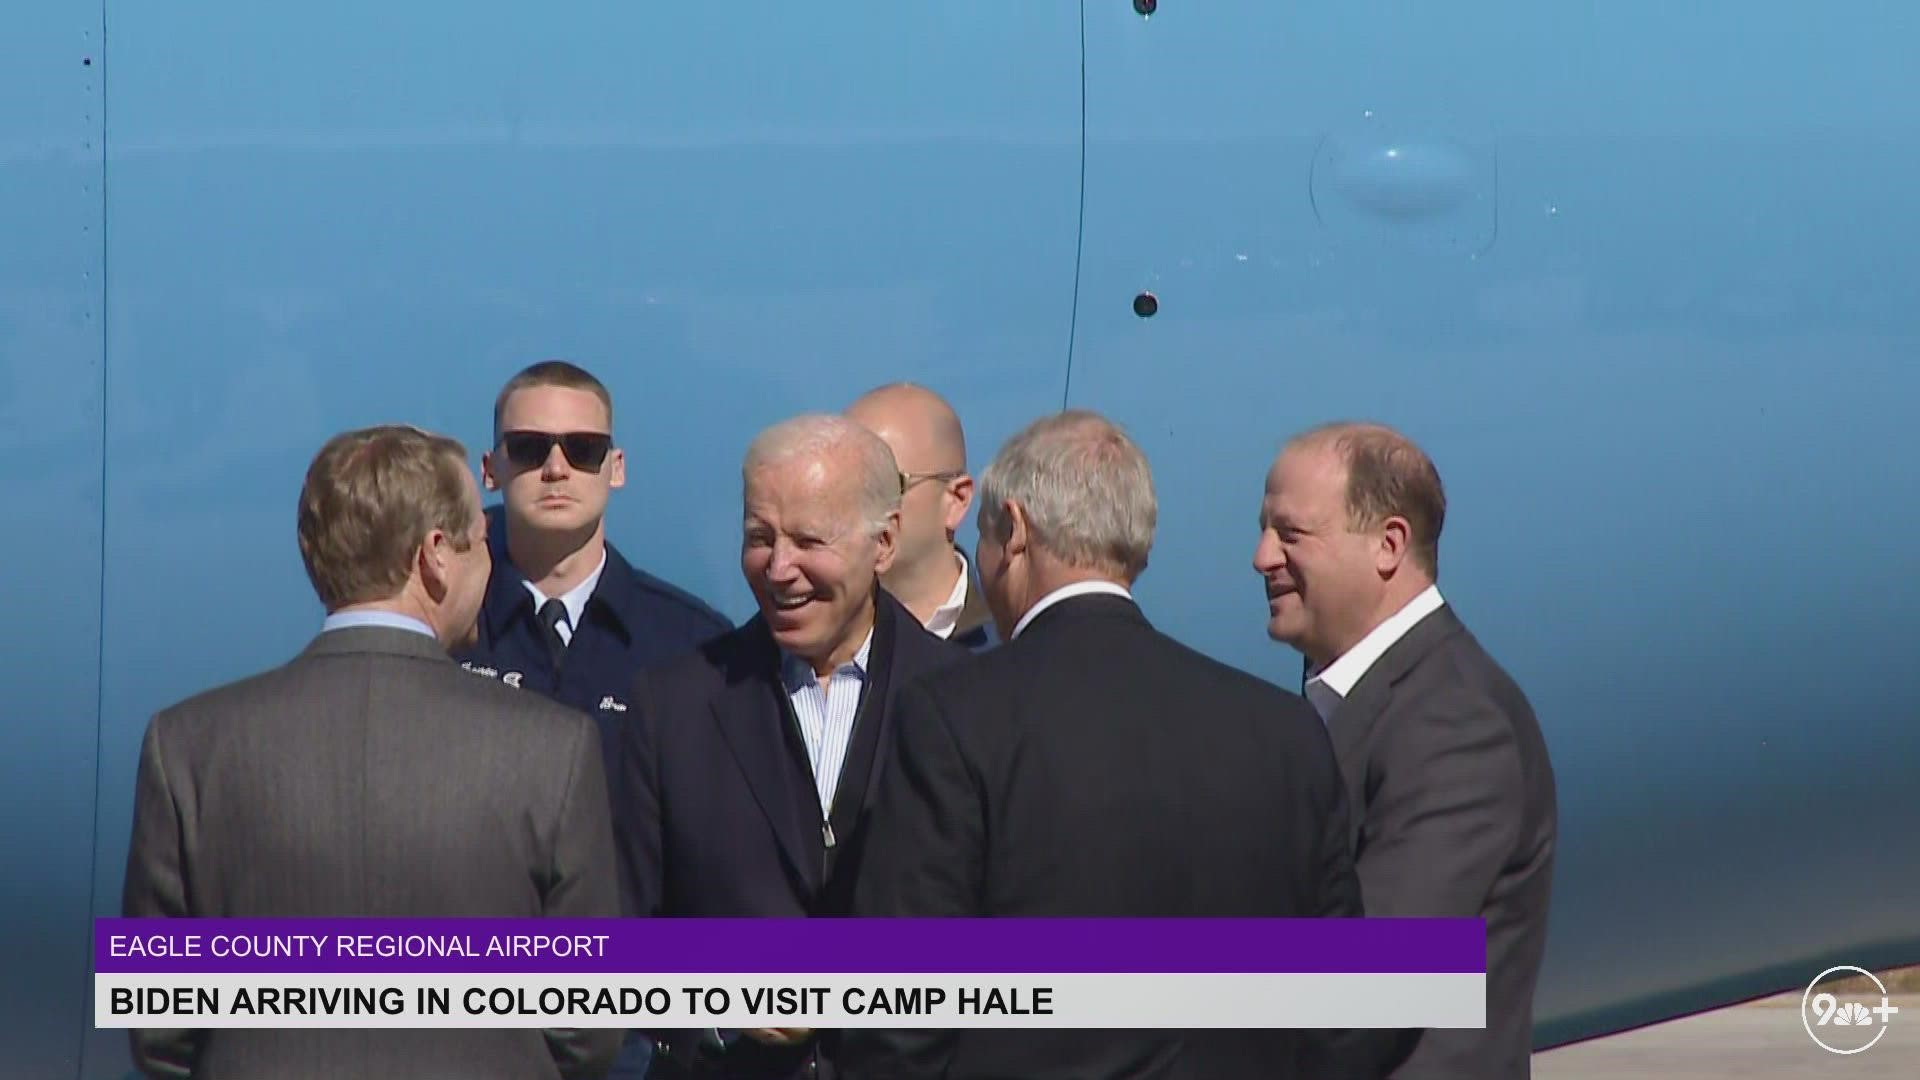 President Joe Biden landed at the Eagle County Regional Airport on Wednesday ahead of a visit to designate Camp Hale as a national monument.